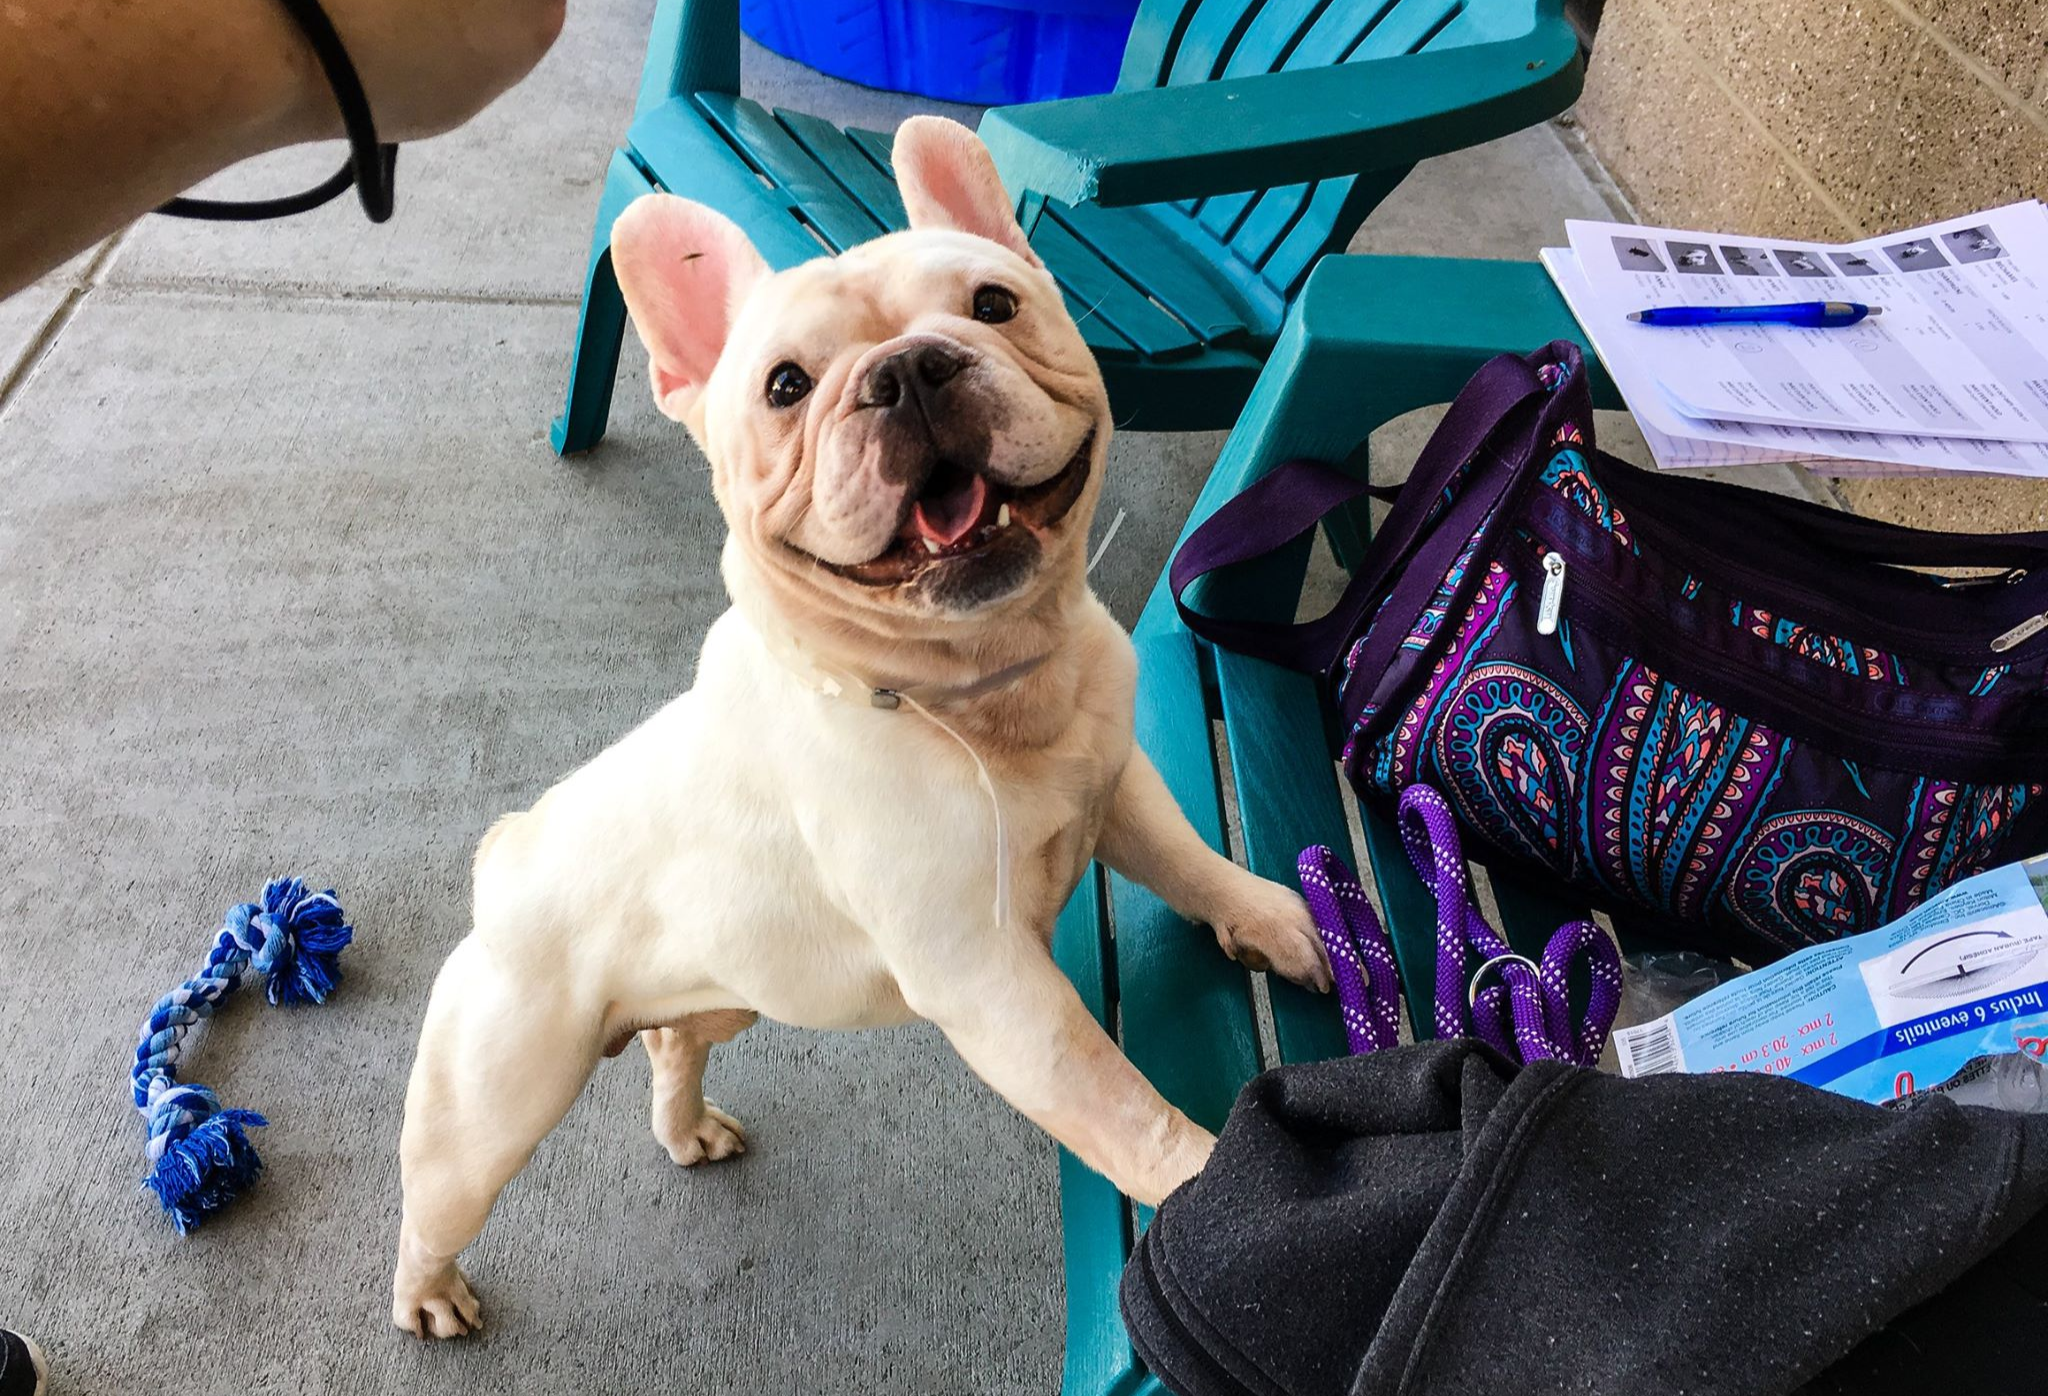 French Bulldog Rescue Network - Last chance to purchase some pawsome toys  for your pups and support FBRN! My Dog Toy will be donating 20% of proceeds  to FBRN through tomorrow, 8/31!